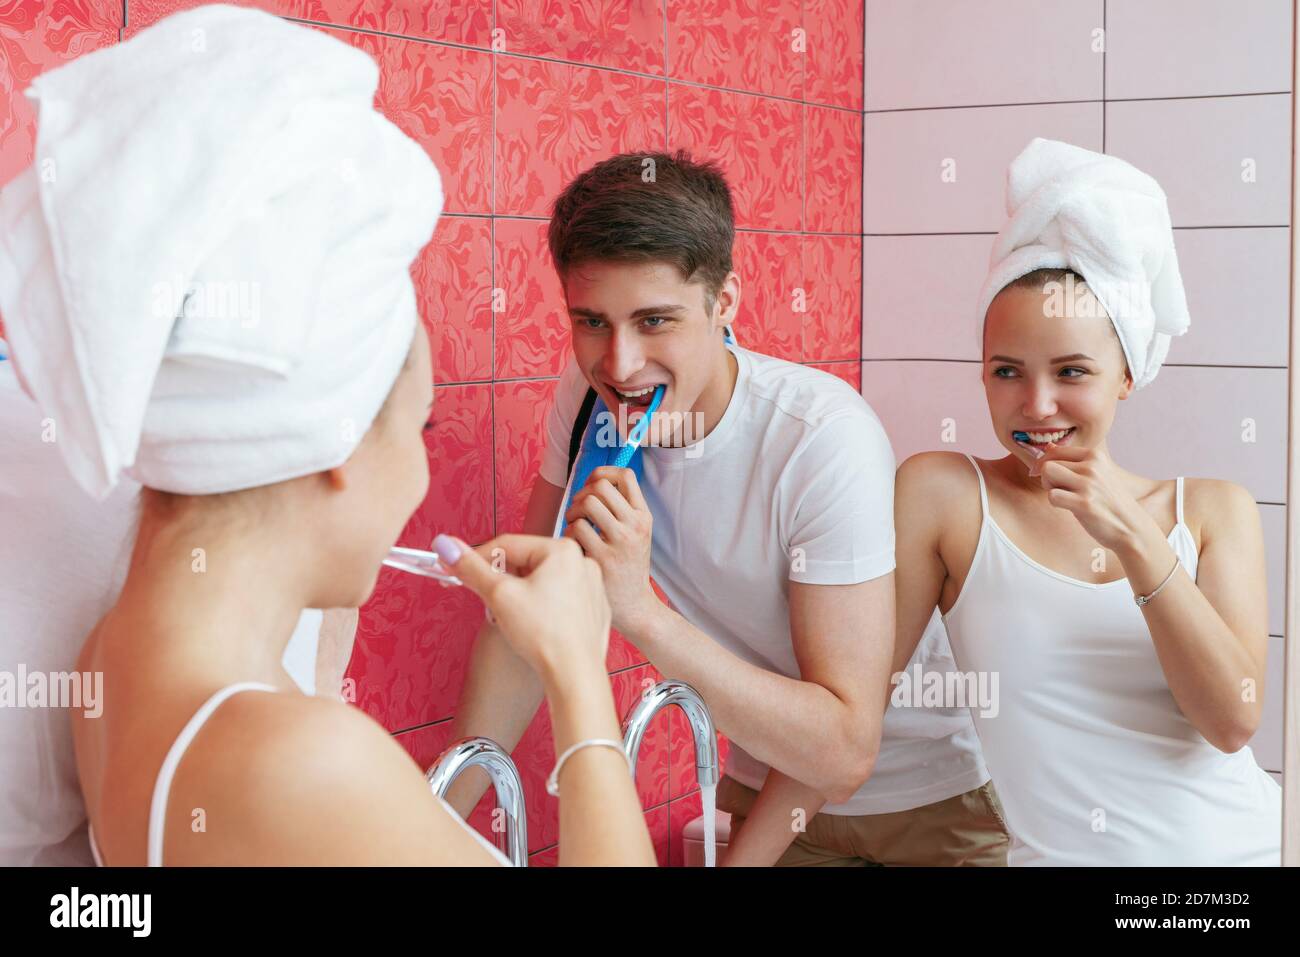 A young couple is brushing teeth. Couple fooling around in the bathroom. Lifestyle photography Stock Photo